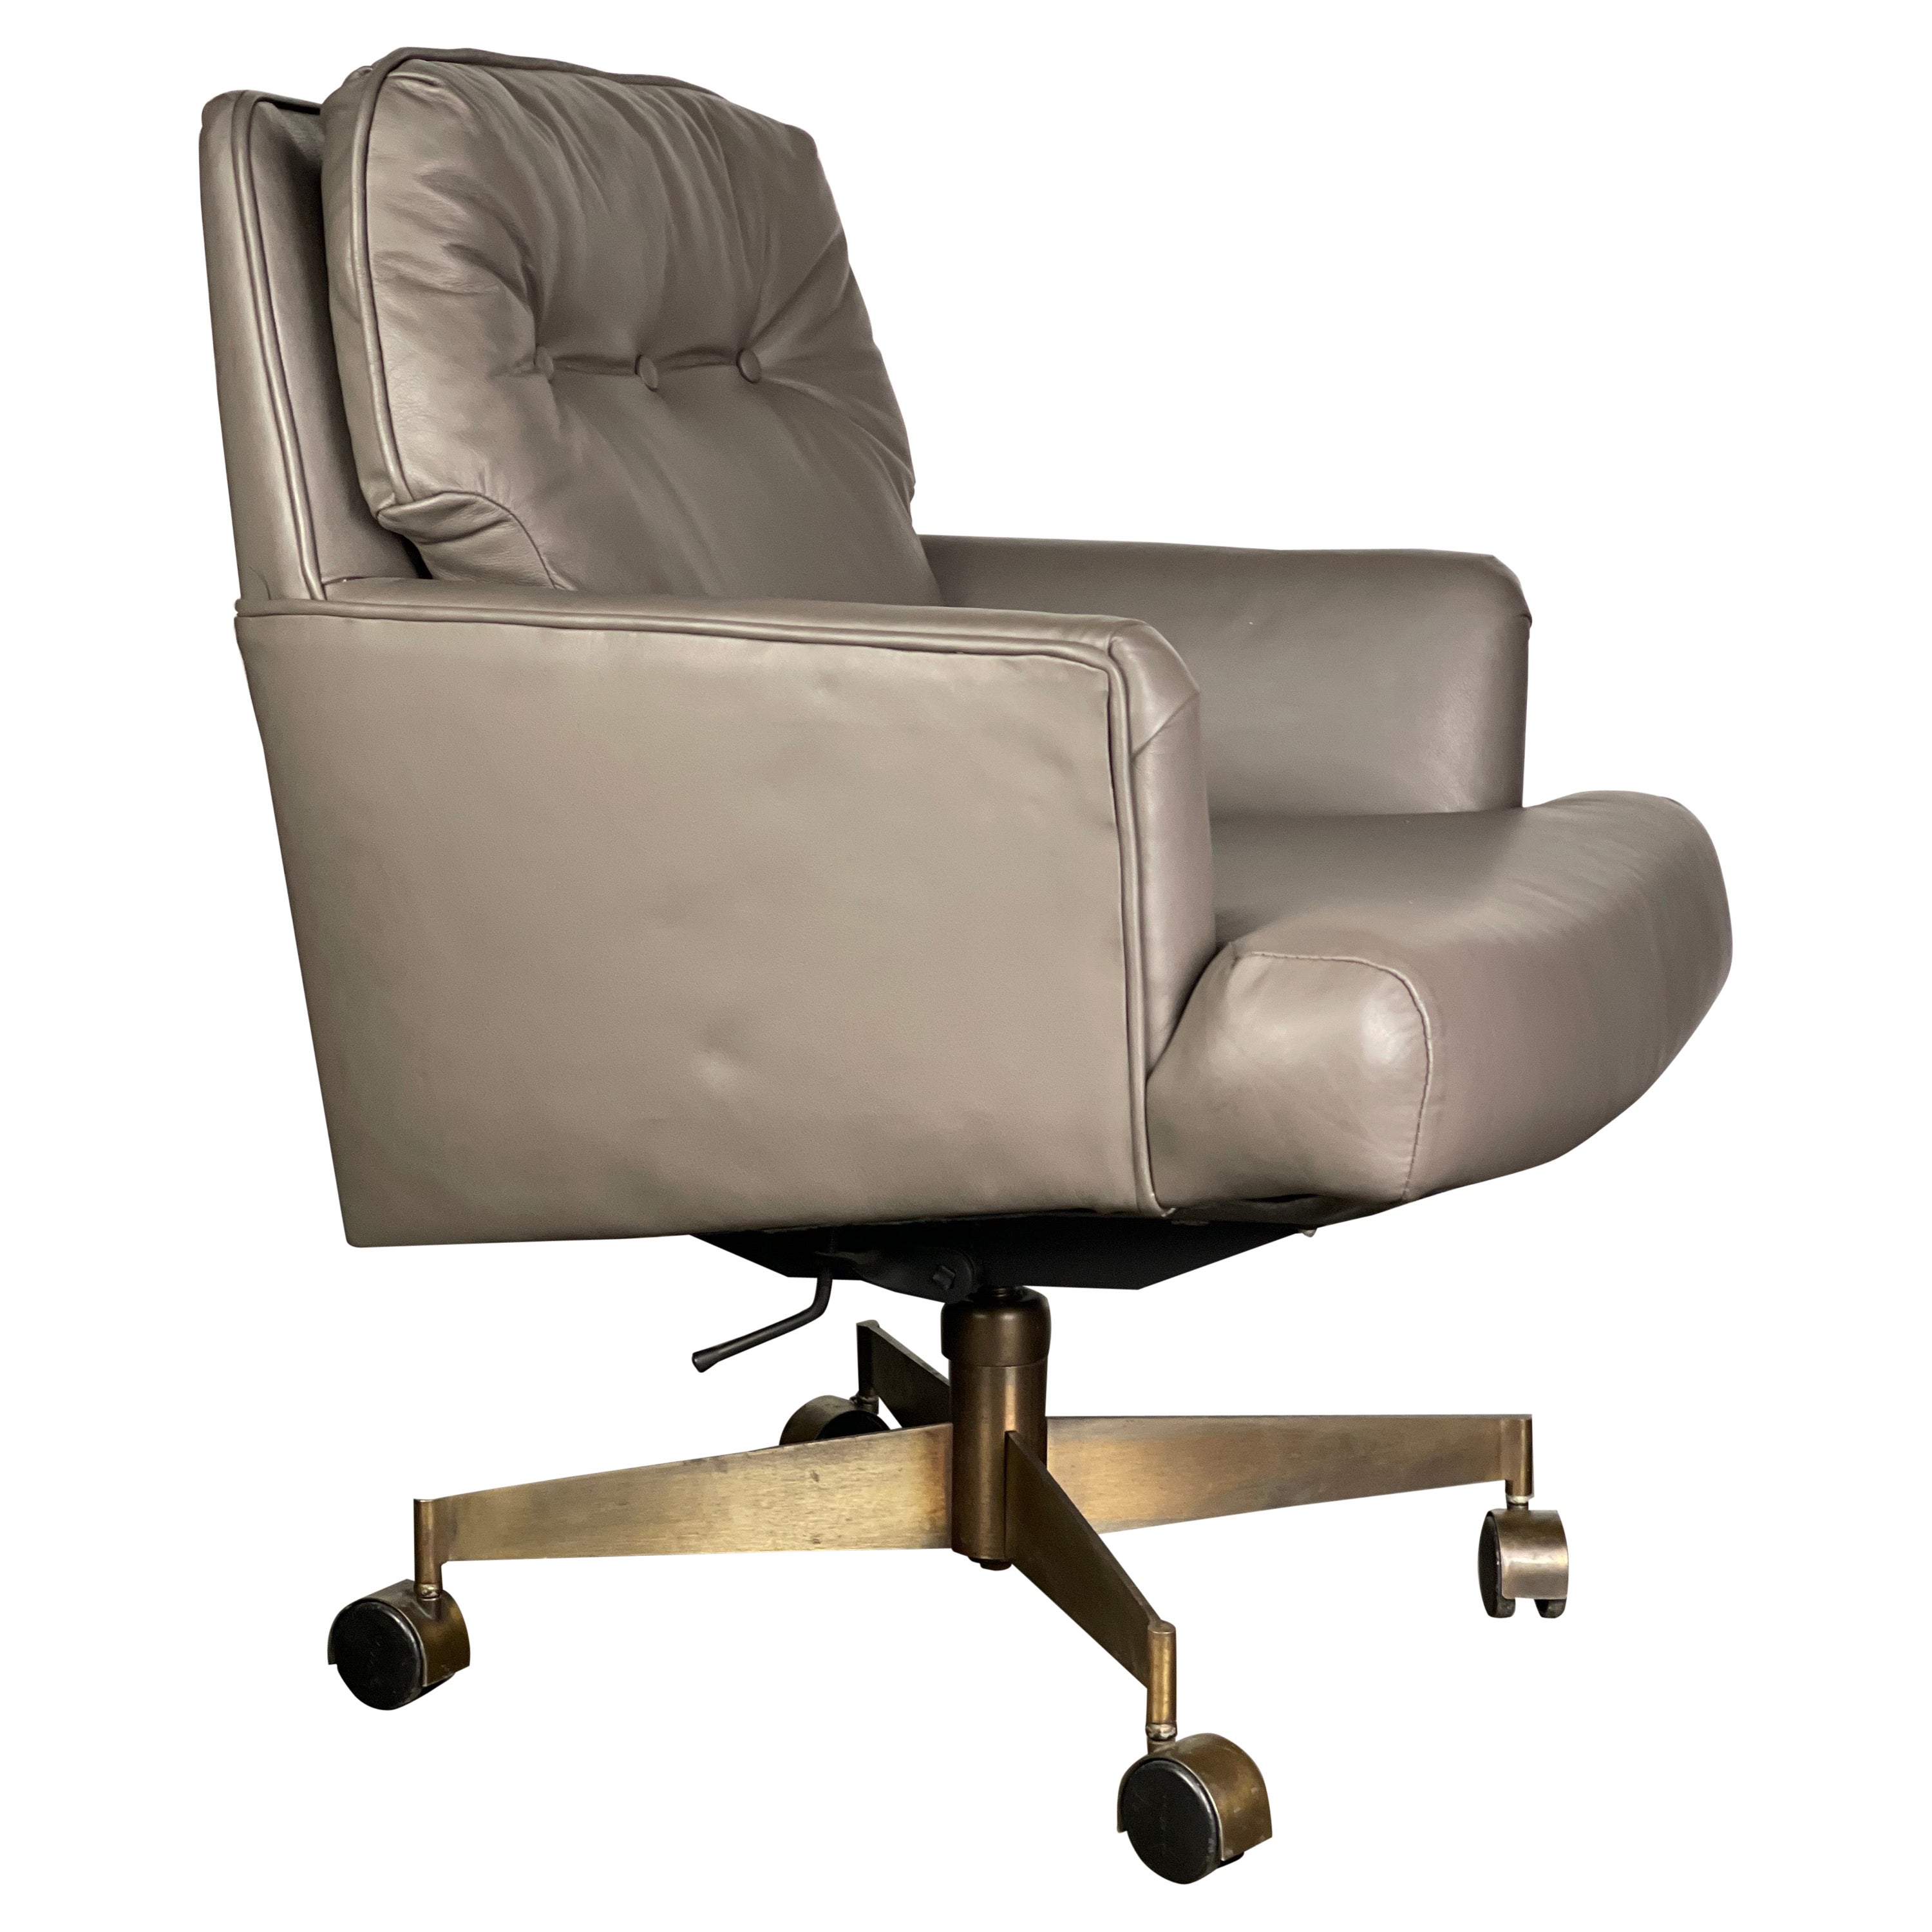 Dunbar Executive Desk Chair by Edward Wormley in Leather and Brass